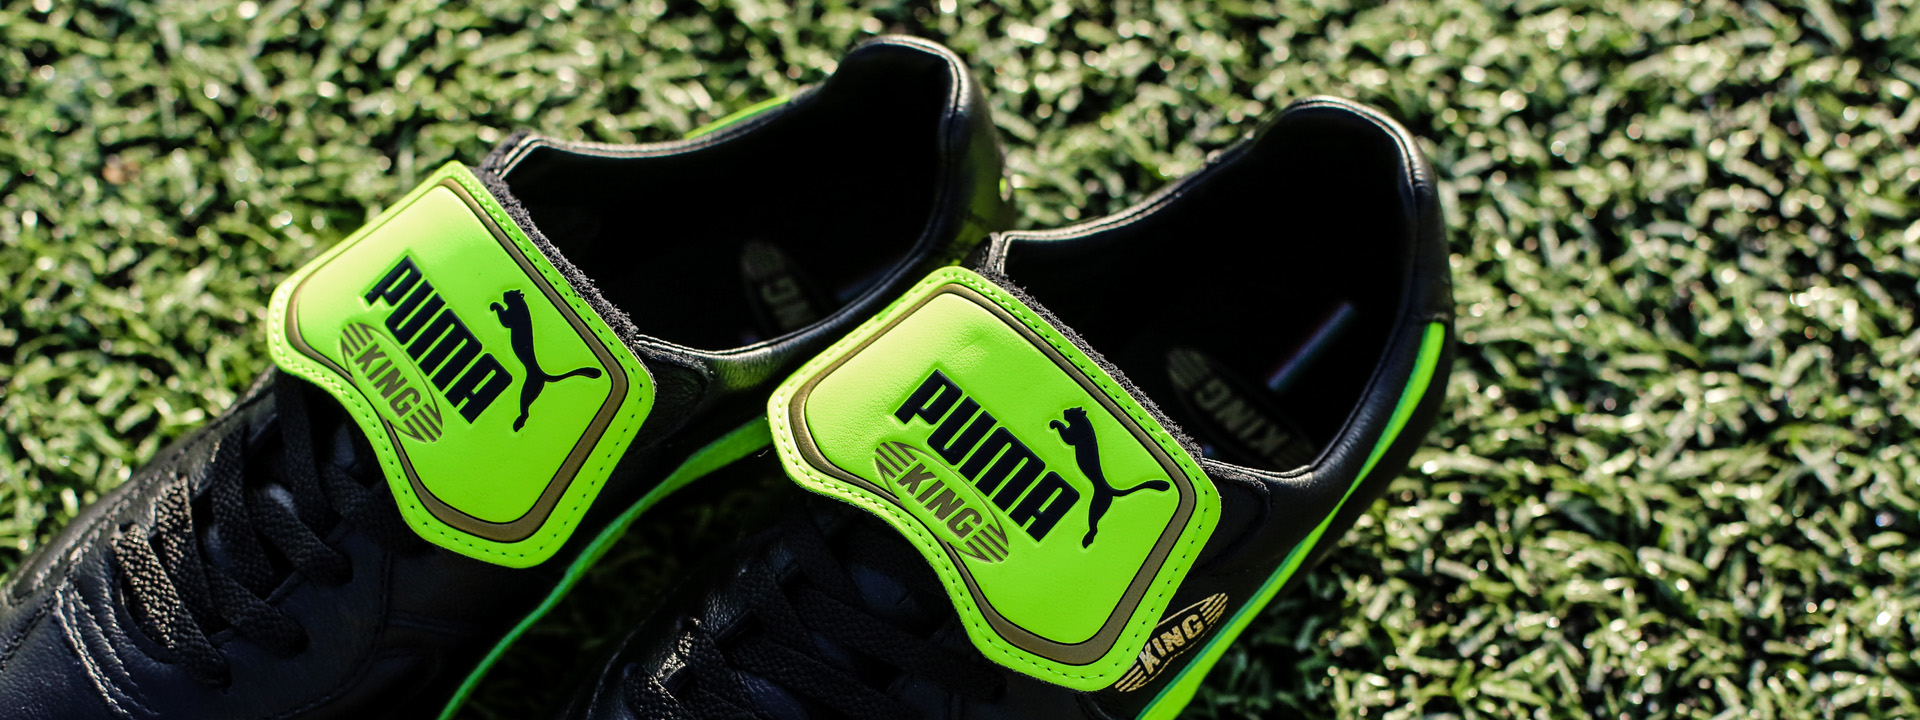 puma-king-made-in-italy-colors-1920x720-2.jpg